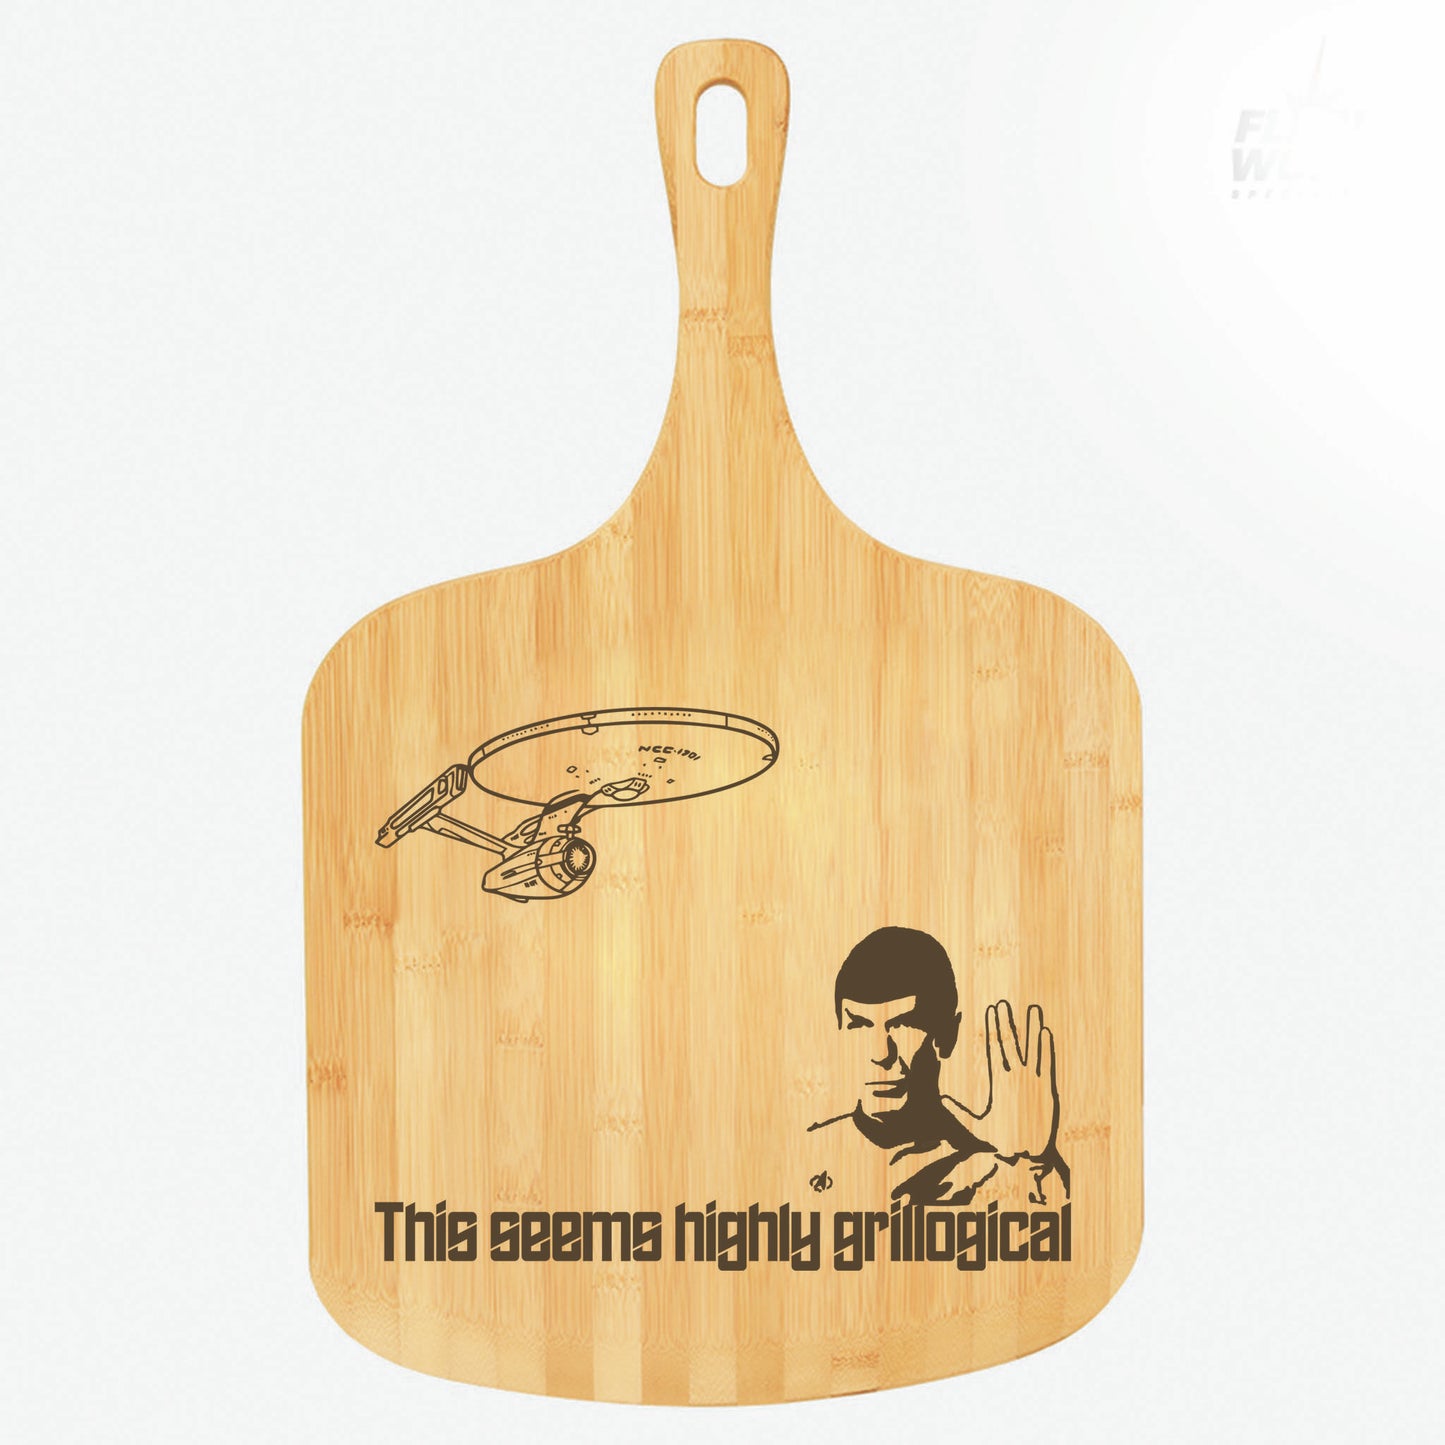 Star Trek Bamboo Cutting Boards | Spock | This Seems Highly Grillogical Wood Cutting Boards | Different Styles Available